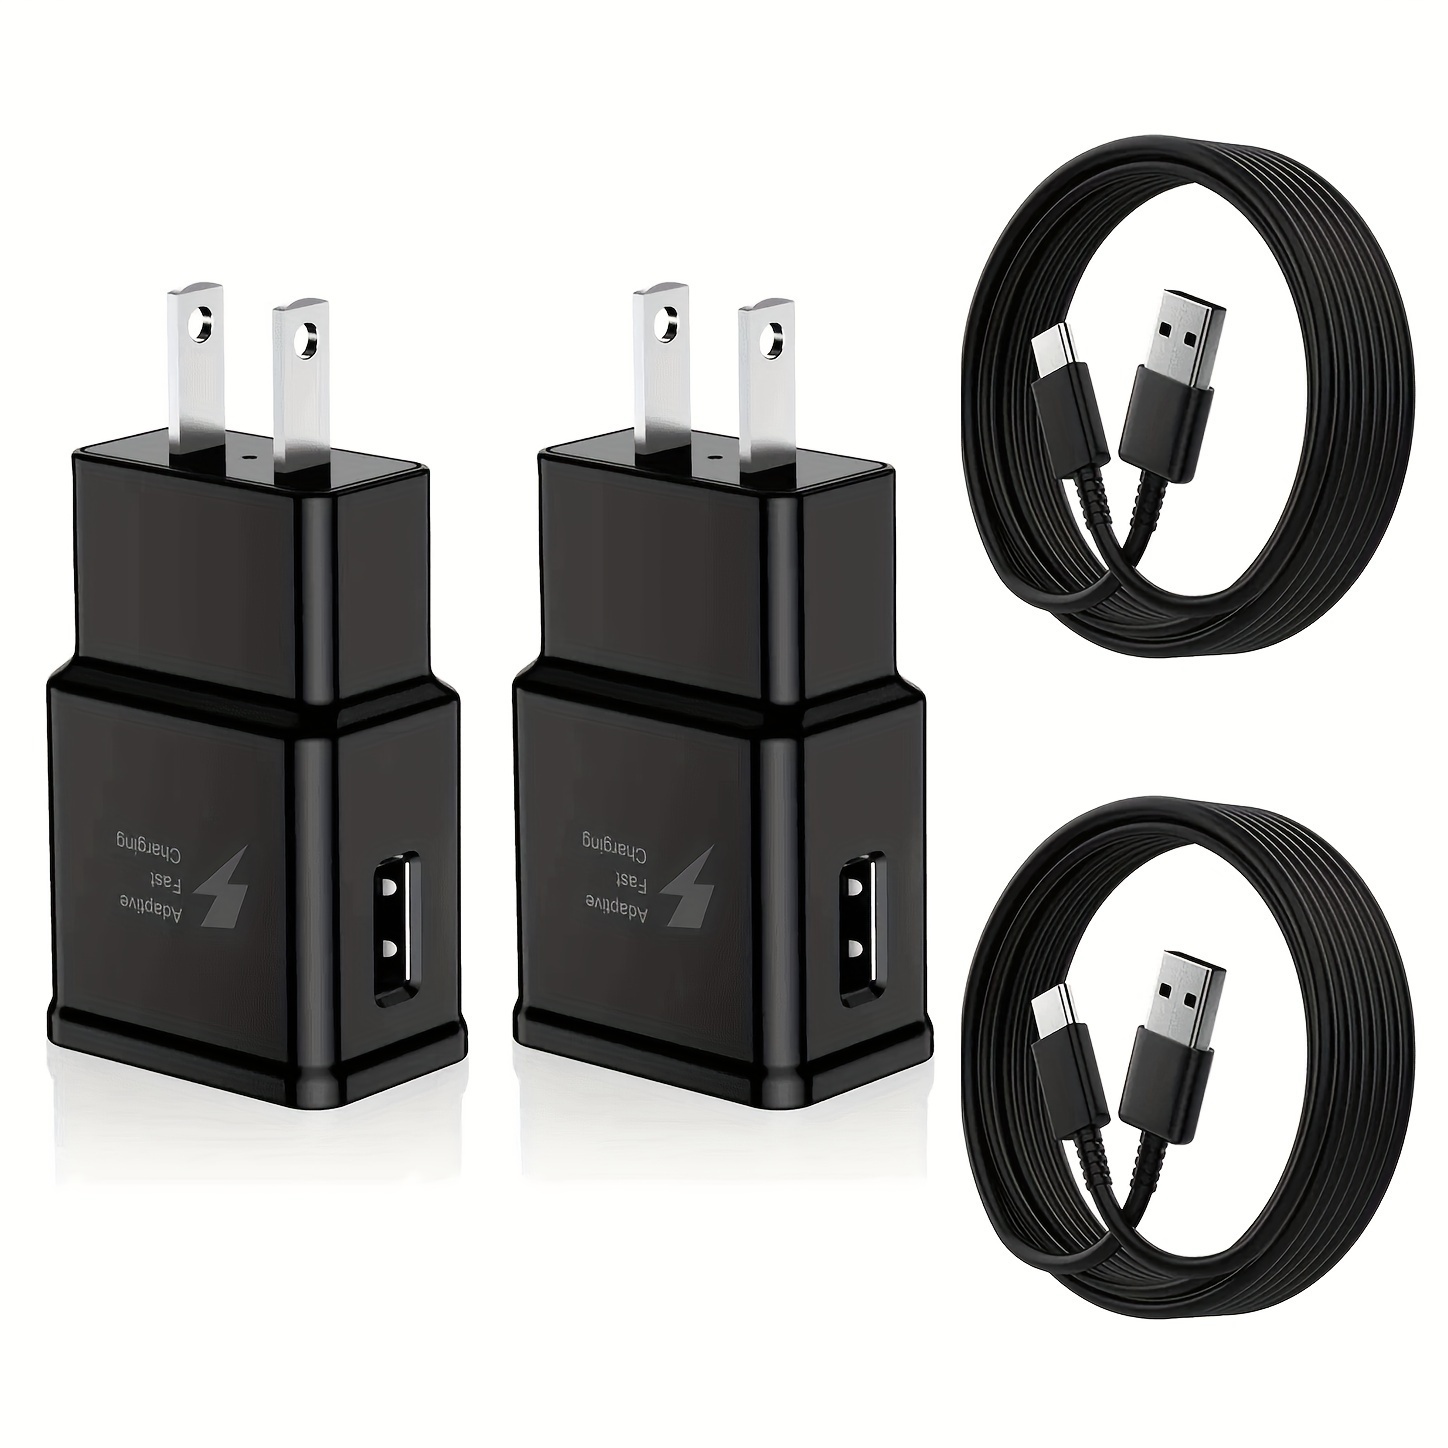 

2-pack Type-c 15w Charger With 4ft Usb-c Cable For Galaxy S22/s22 Plus/s21/s21 Ultra/s20/s20 Plus/s8/s9/s9 Plus/s10/s10e/note 8/note 9/ Note 10/note 20/z Flod 4/z Flip 4/a53/a52/w22/w21